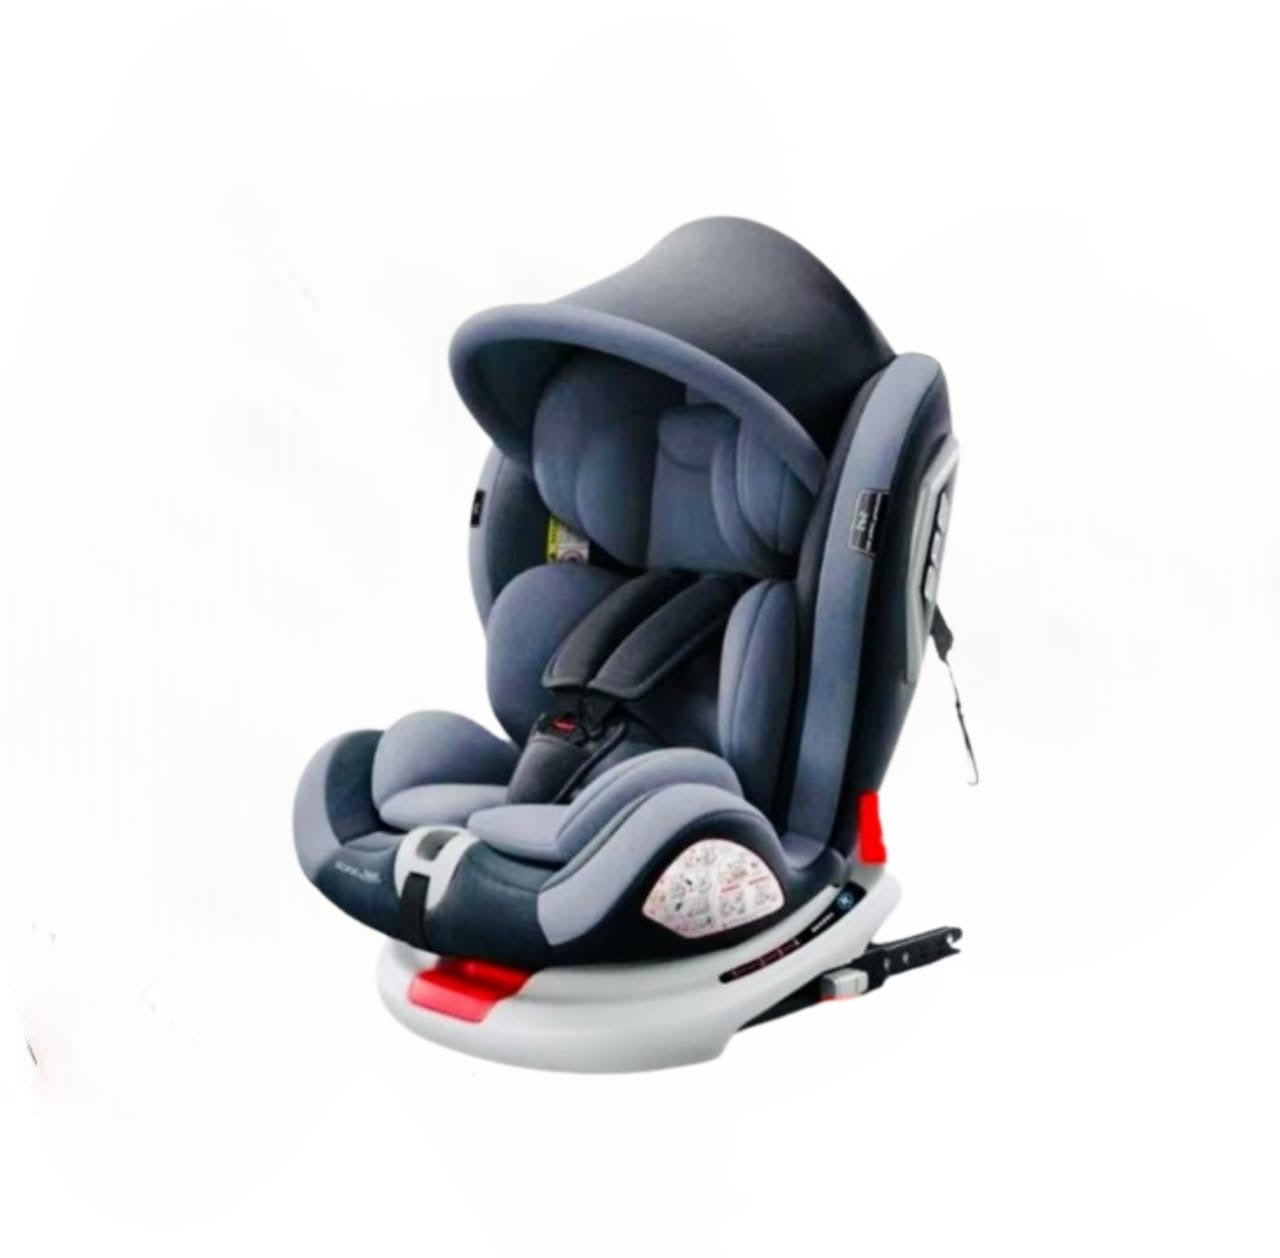 Baby car seat for 0-12 years old,Luxury ISOFIX car seat 360 degree all in one rotational ,comfortable and safe car seat,Black